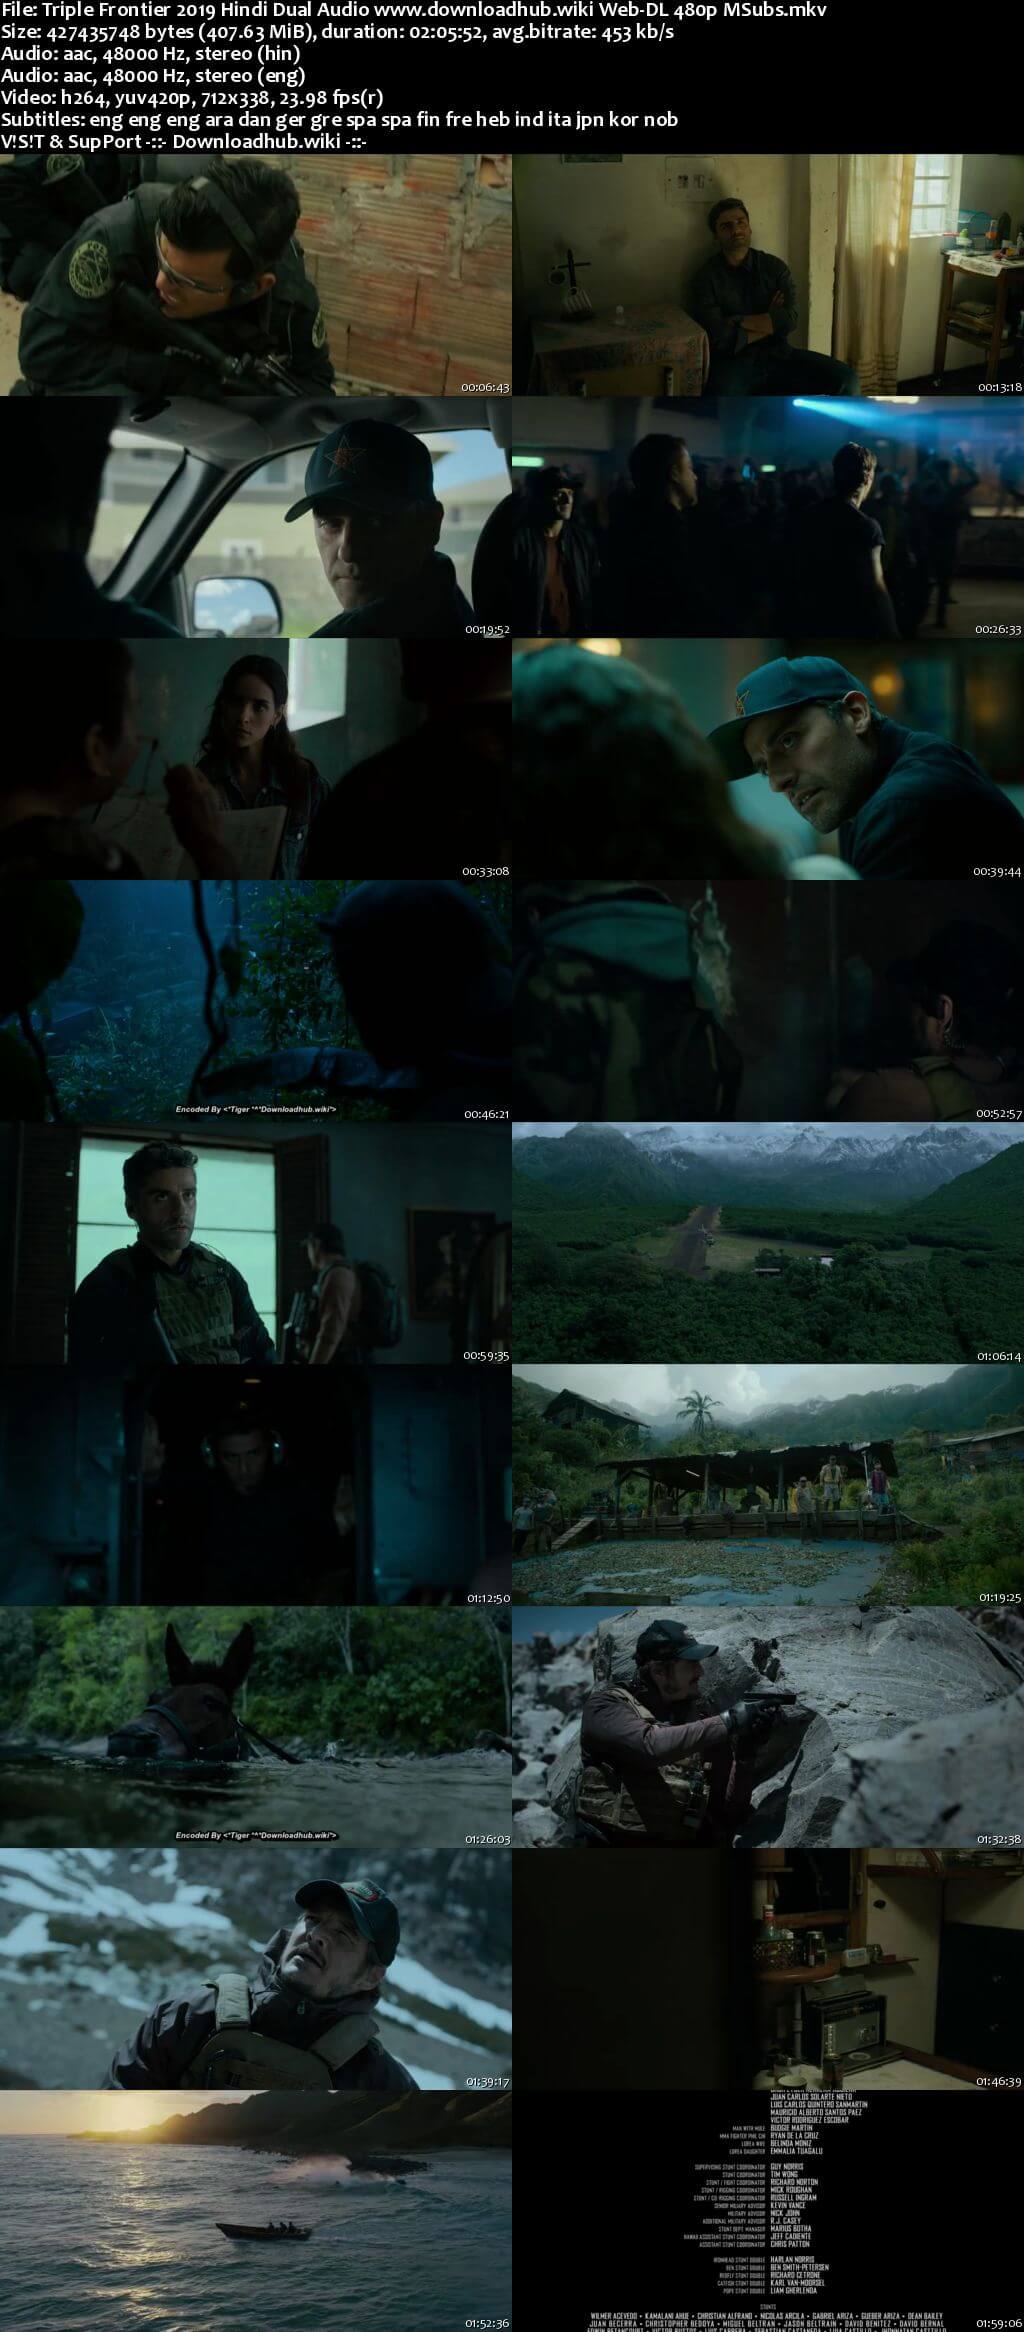 Triple Frontier 2019 Hindi Dual Audio 400MB Web-DL 480p MSubs